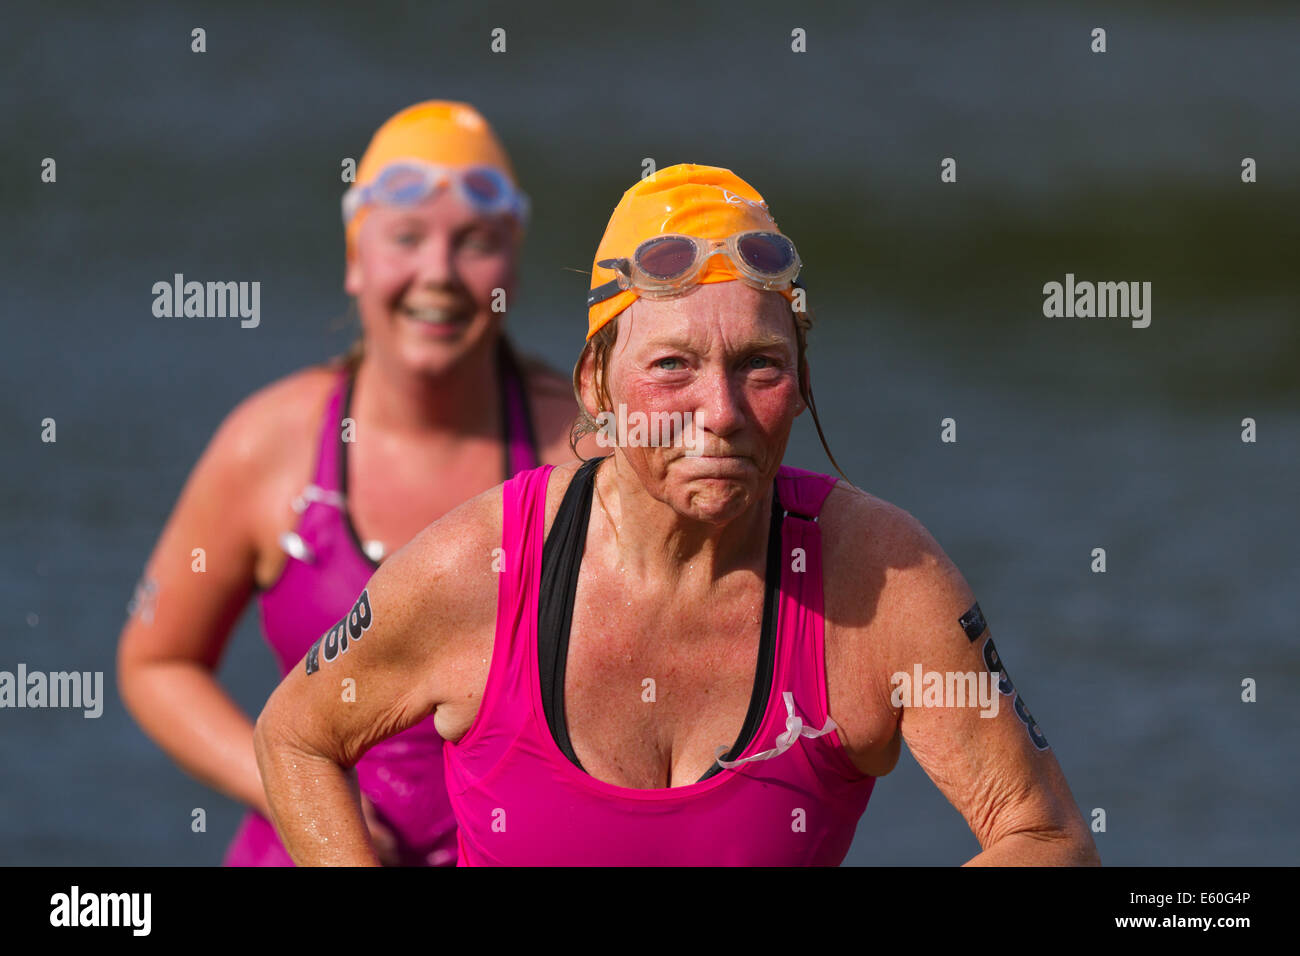 People competing in Ångaloppet, a swimrun competition where you run on land and swim in lakes and the sea several times. Stock Photo